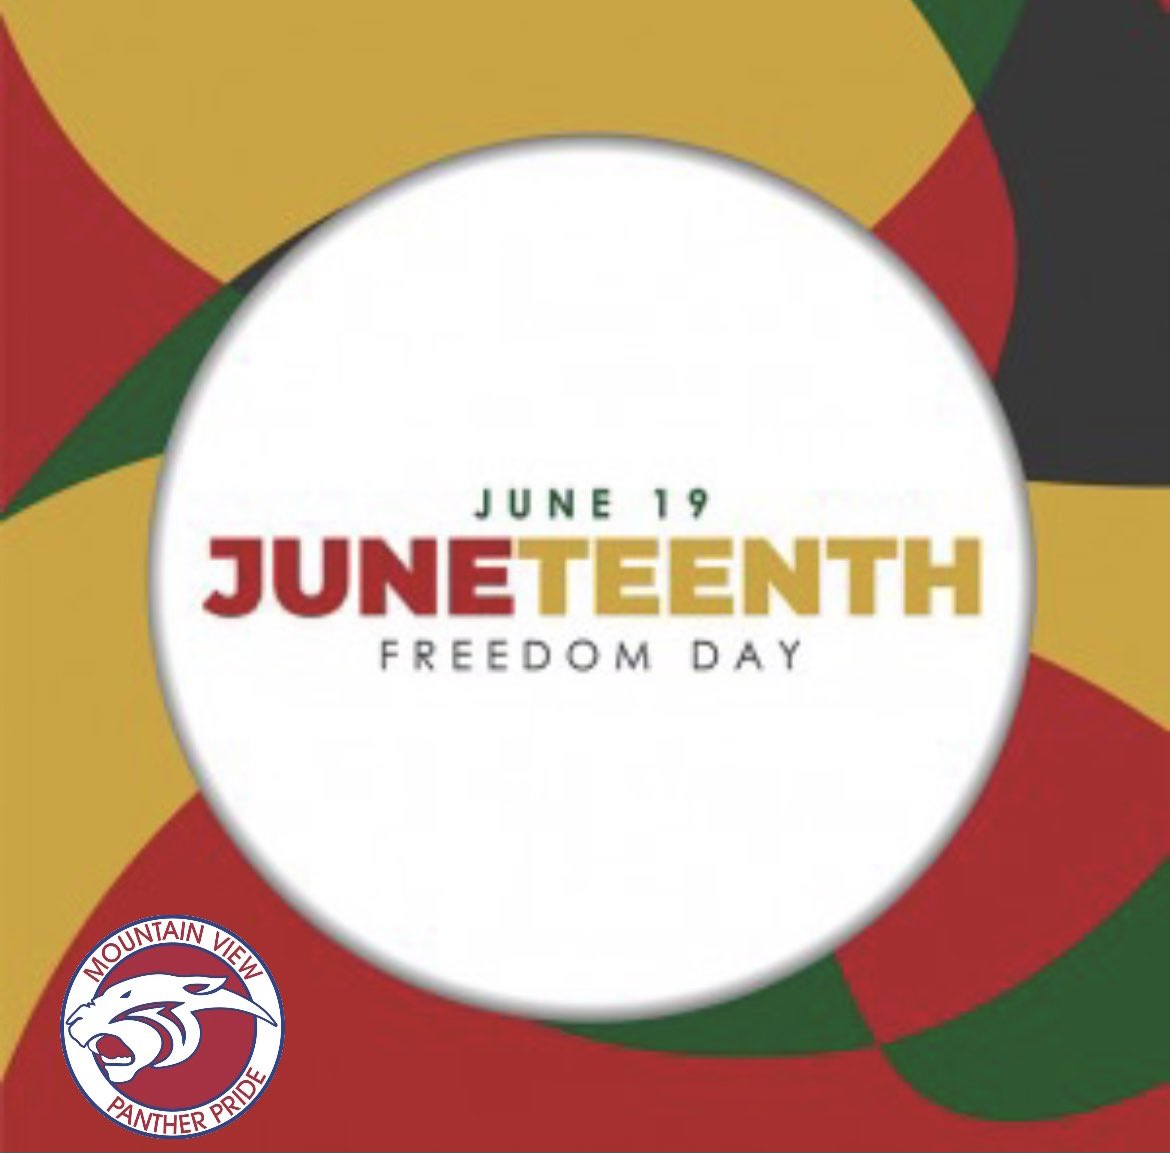 The Panther Community honors June 19th, the end of slavery for African Americans, and celebrates the cultural contributions and ongoing work for justice and equity. #Pantherpride #panthernation #pantherproud